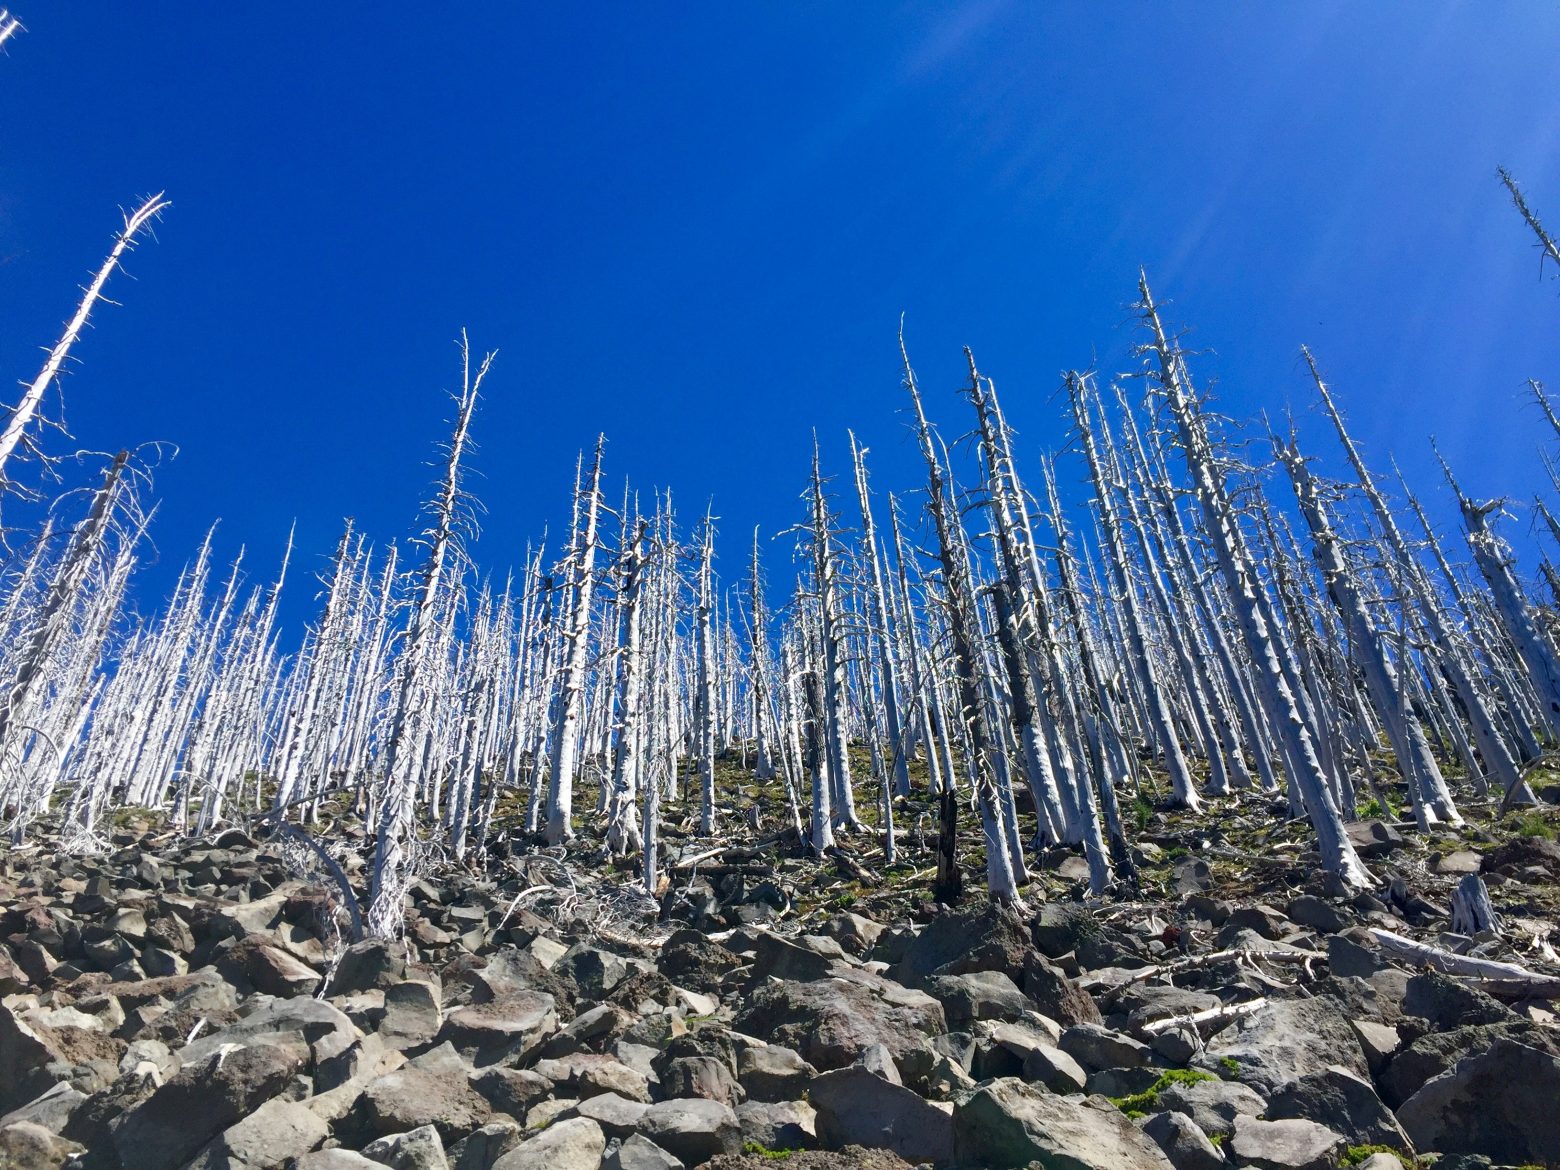 A steep stand of dead trees next t the PCT piercing a blue sky